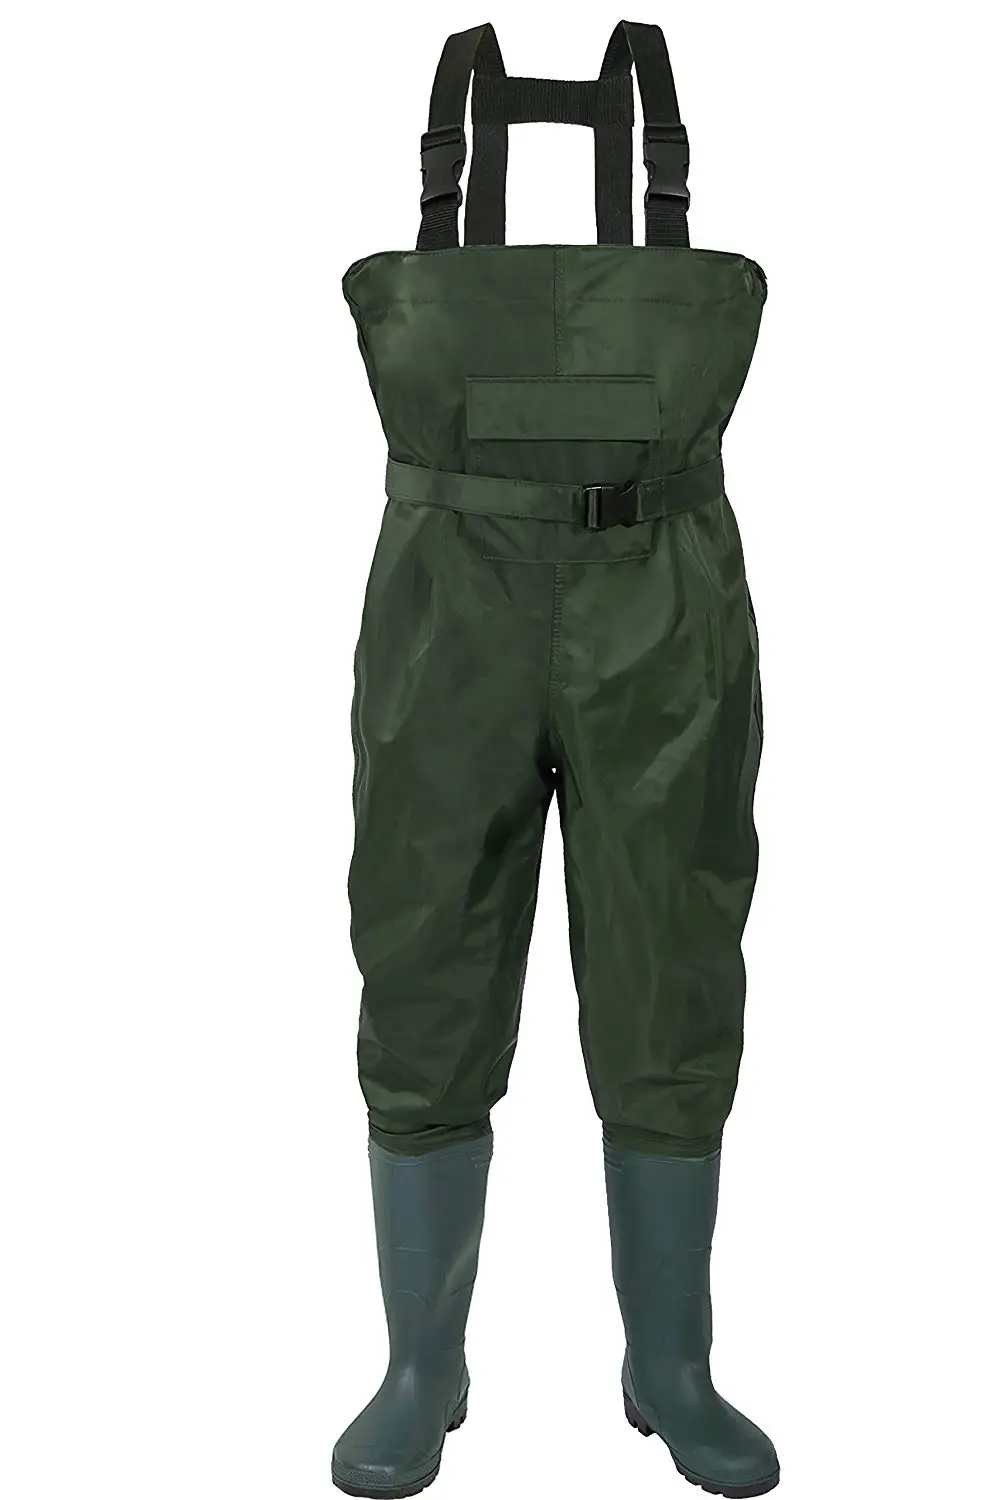 Cheap Women In Waders, find Women In Waders deals on line at Alibaba.com